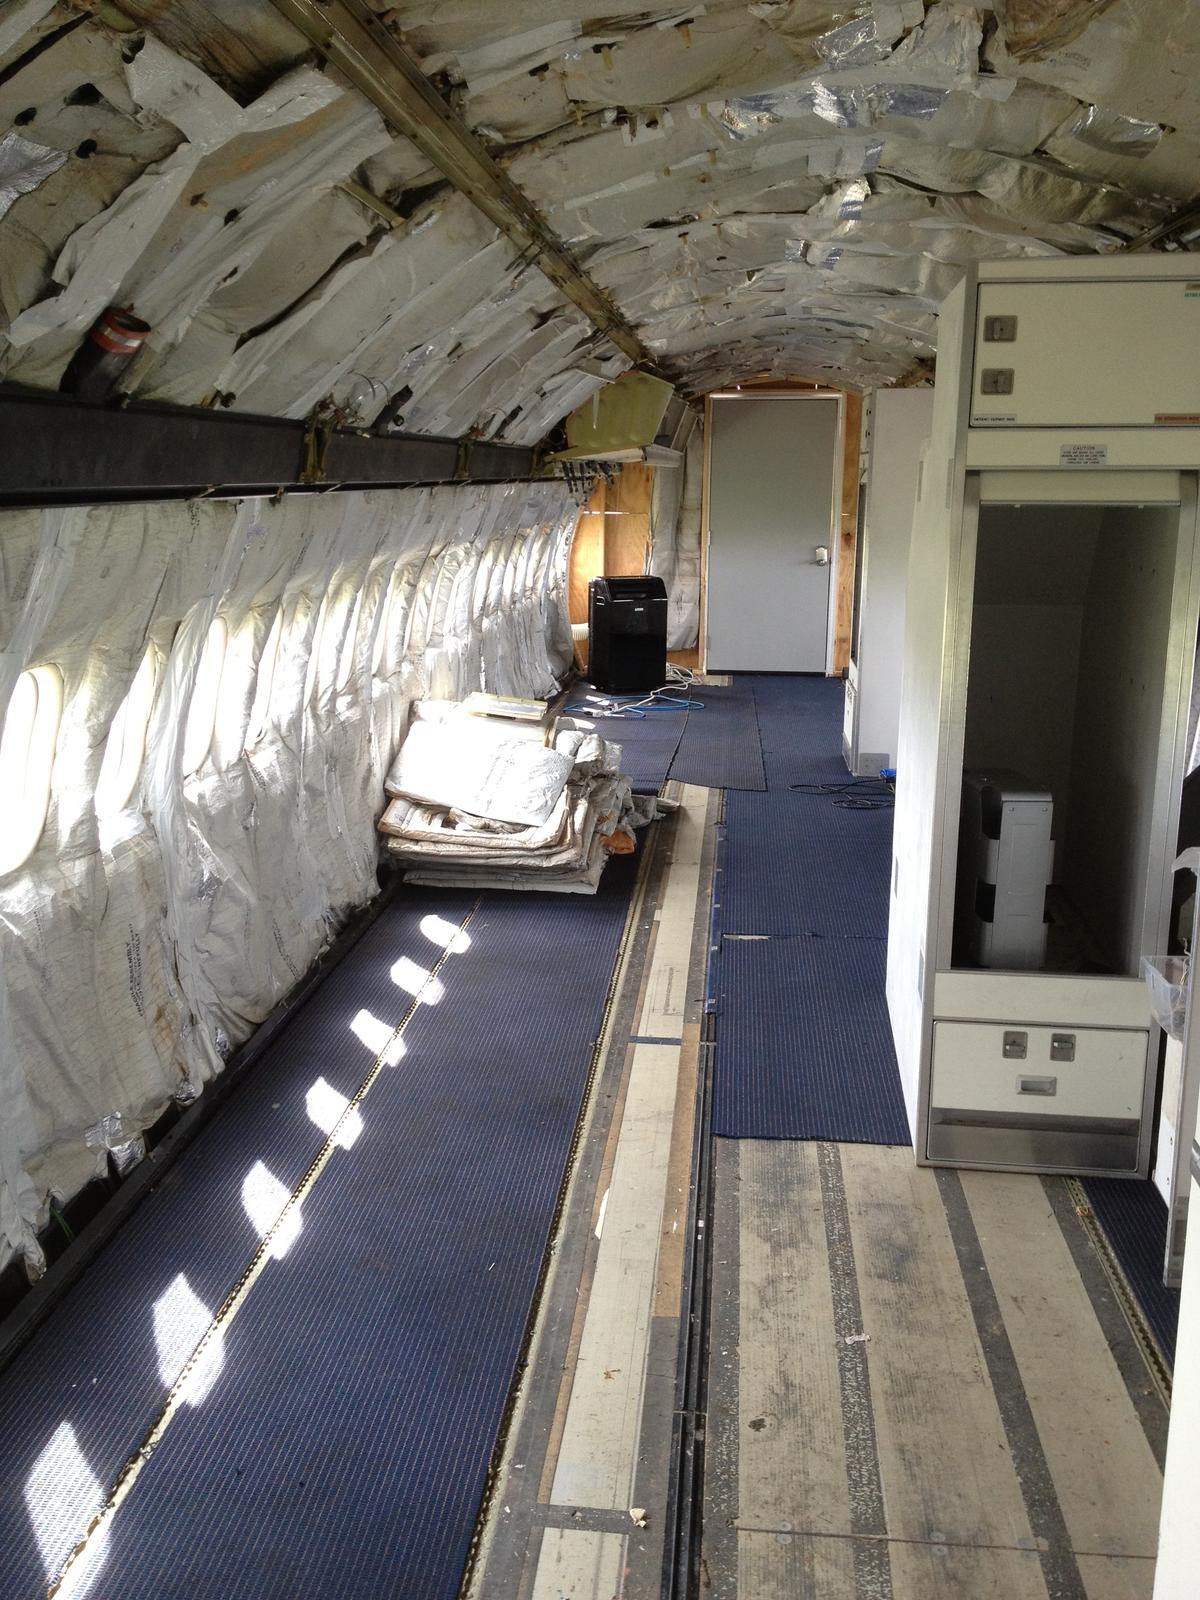 The interior of the planes before the transformation began. (Courtesy of <a href="https://givemeathumbsup.review/plane">Captain Joe Axline</a>)